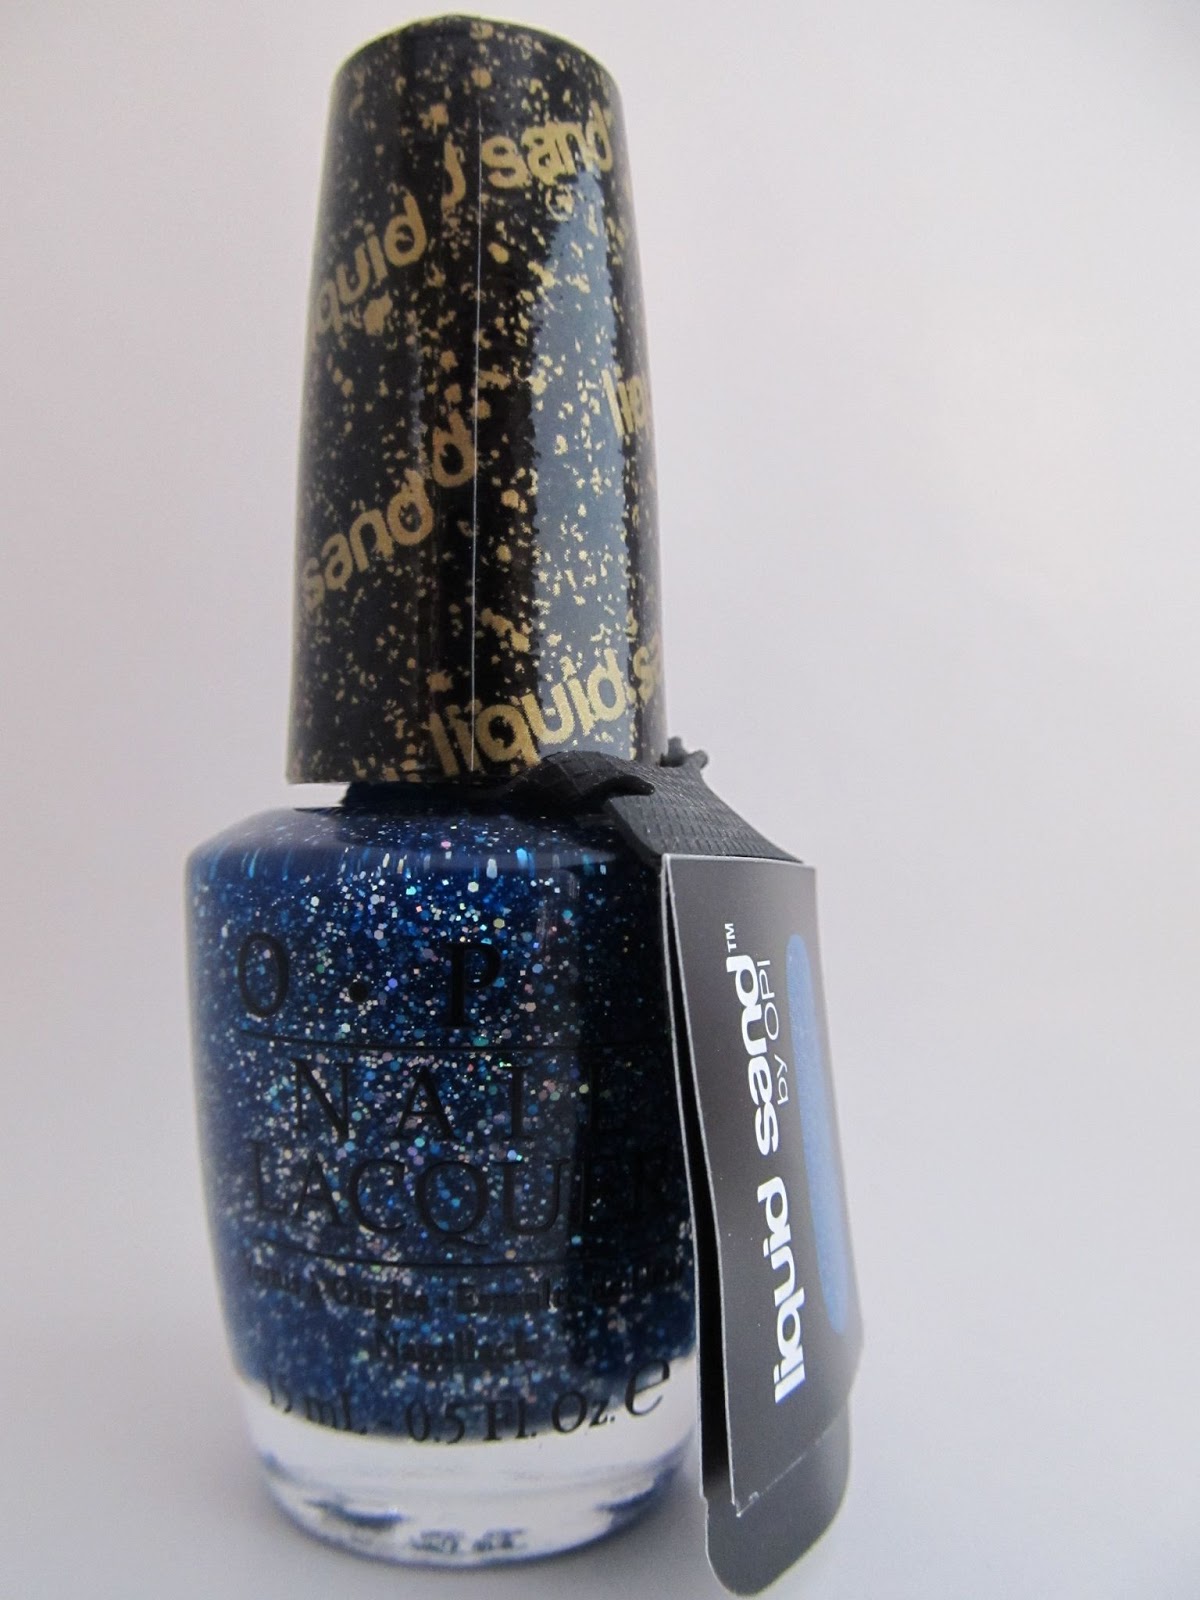 It's all about the polish: Liquid Sand giveaway